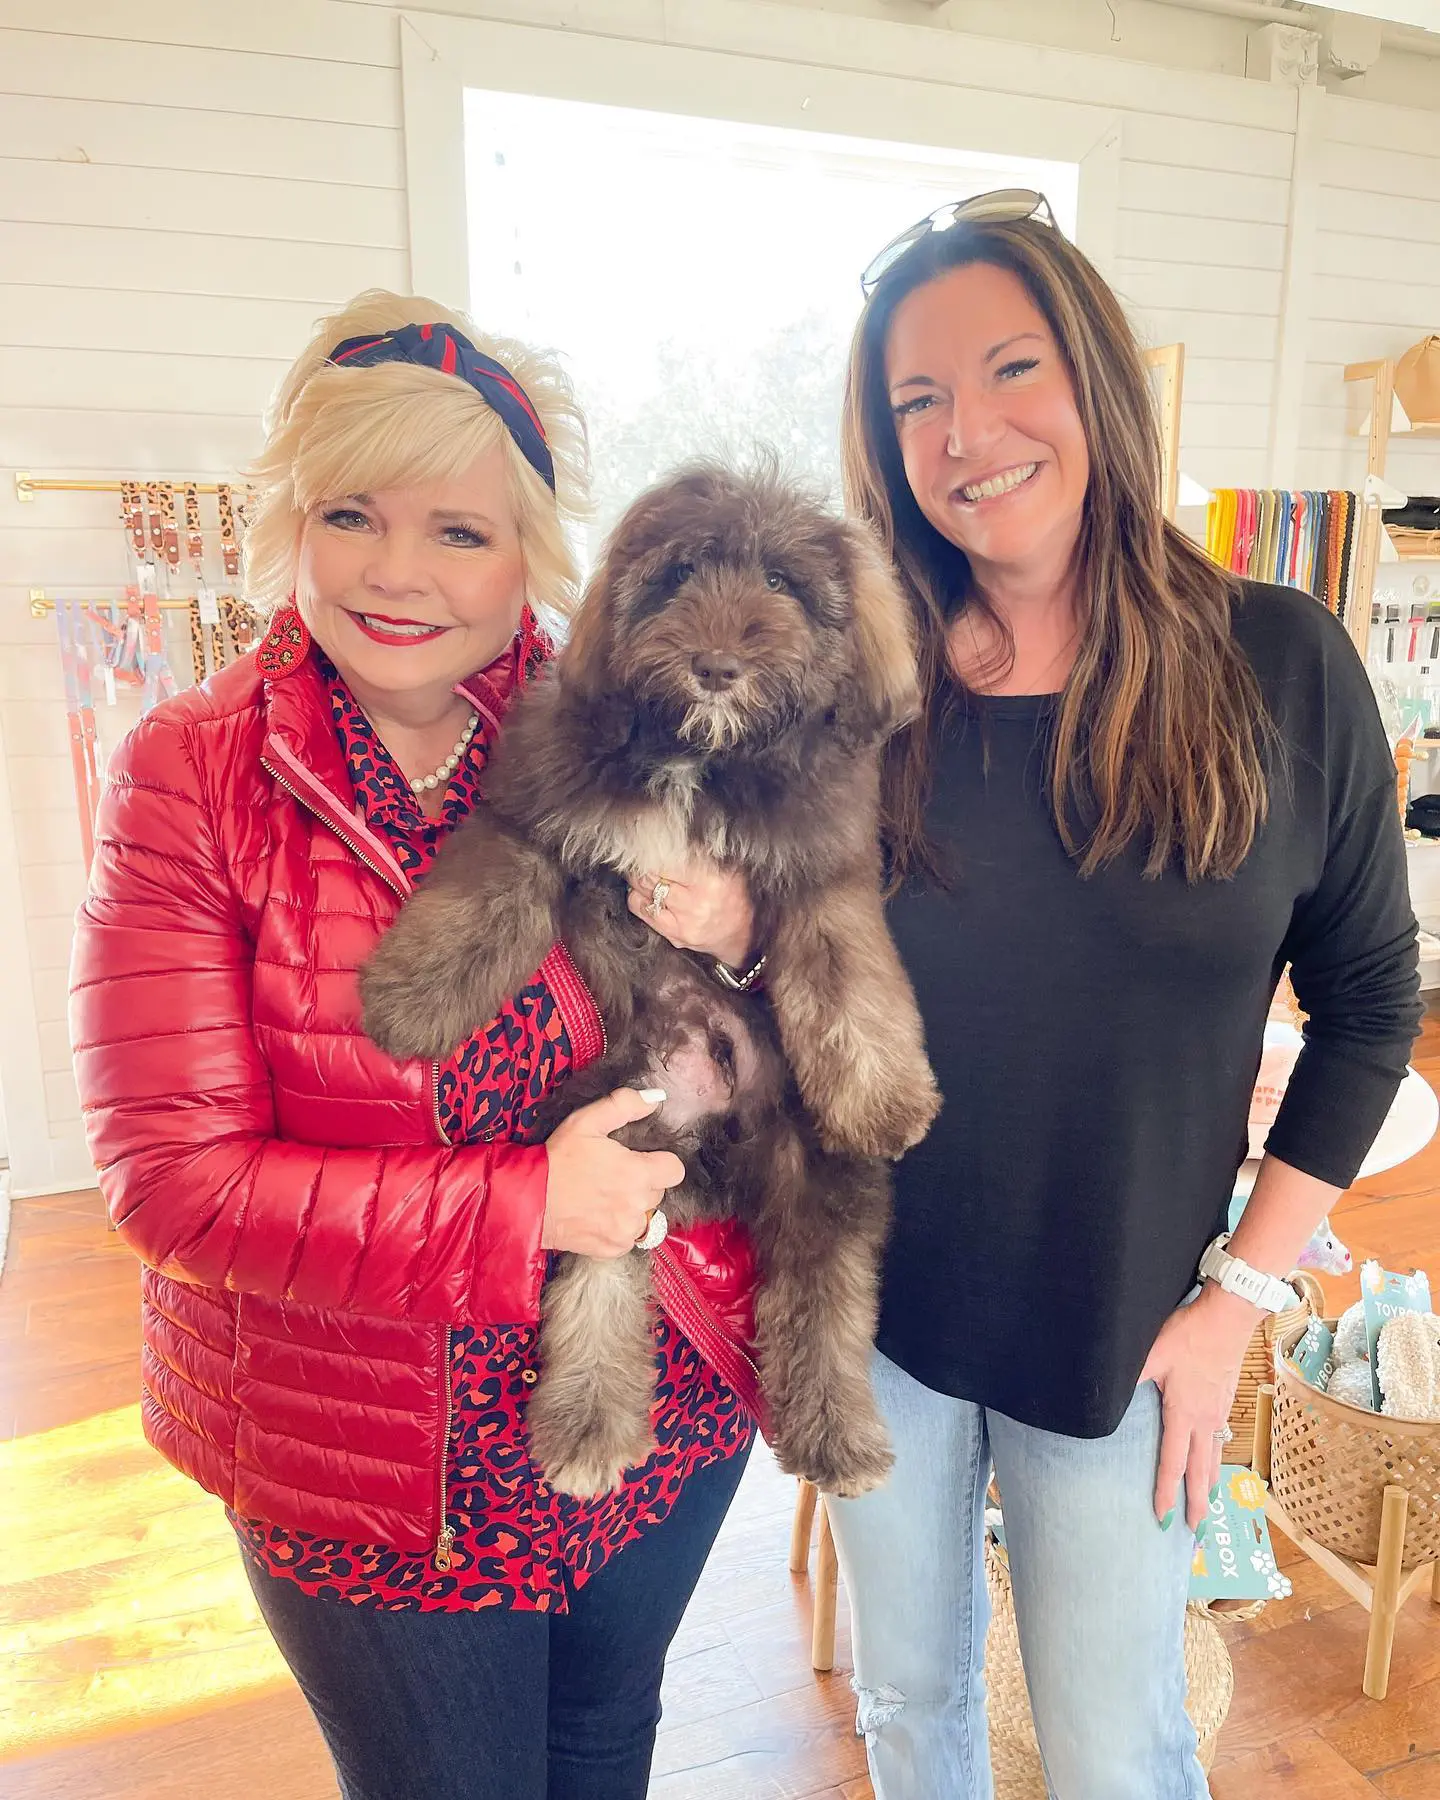 Sherri Smeraglia, owner of Teddybear Goldendoodles, with one of her client's first wookie golden doodles. Sherri is a dog breeder who specializes in golden doodles. She has been breeding dogs for over 20 years and has had great success with her goldendoodles.